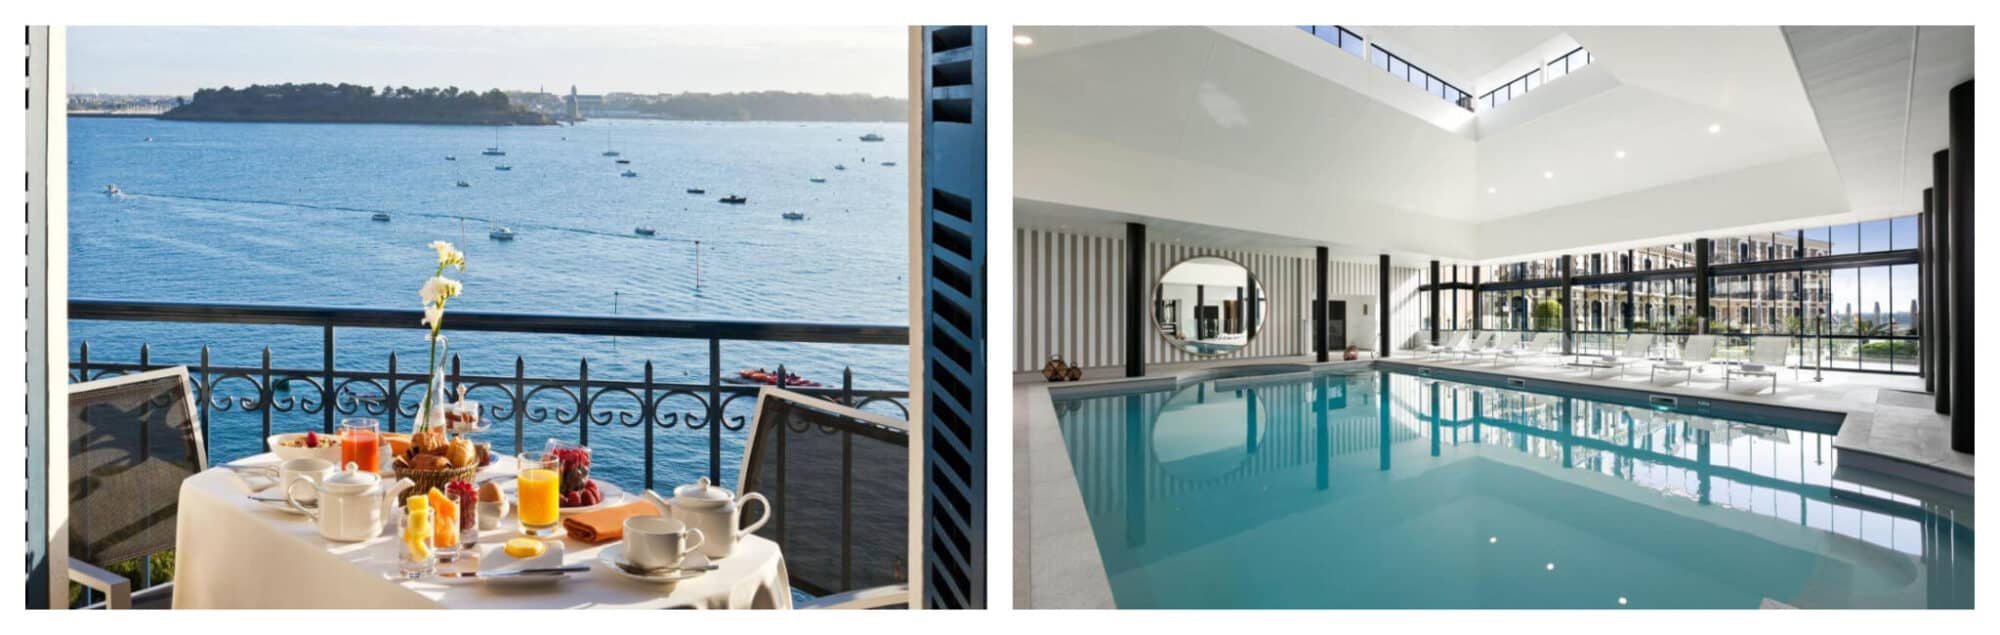 Left: A balcony breakfast with a view of the Dinard sea in one of the suites in Le Grand Hotel Dinard; Right: Le Grand Dinard's indoor pool with glassed top-to-floor walls.